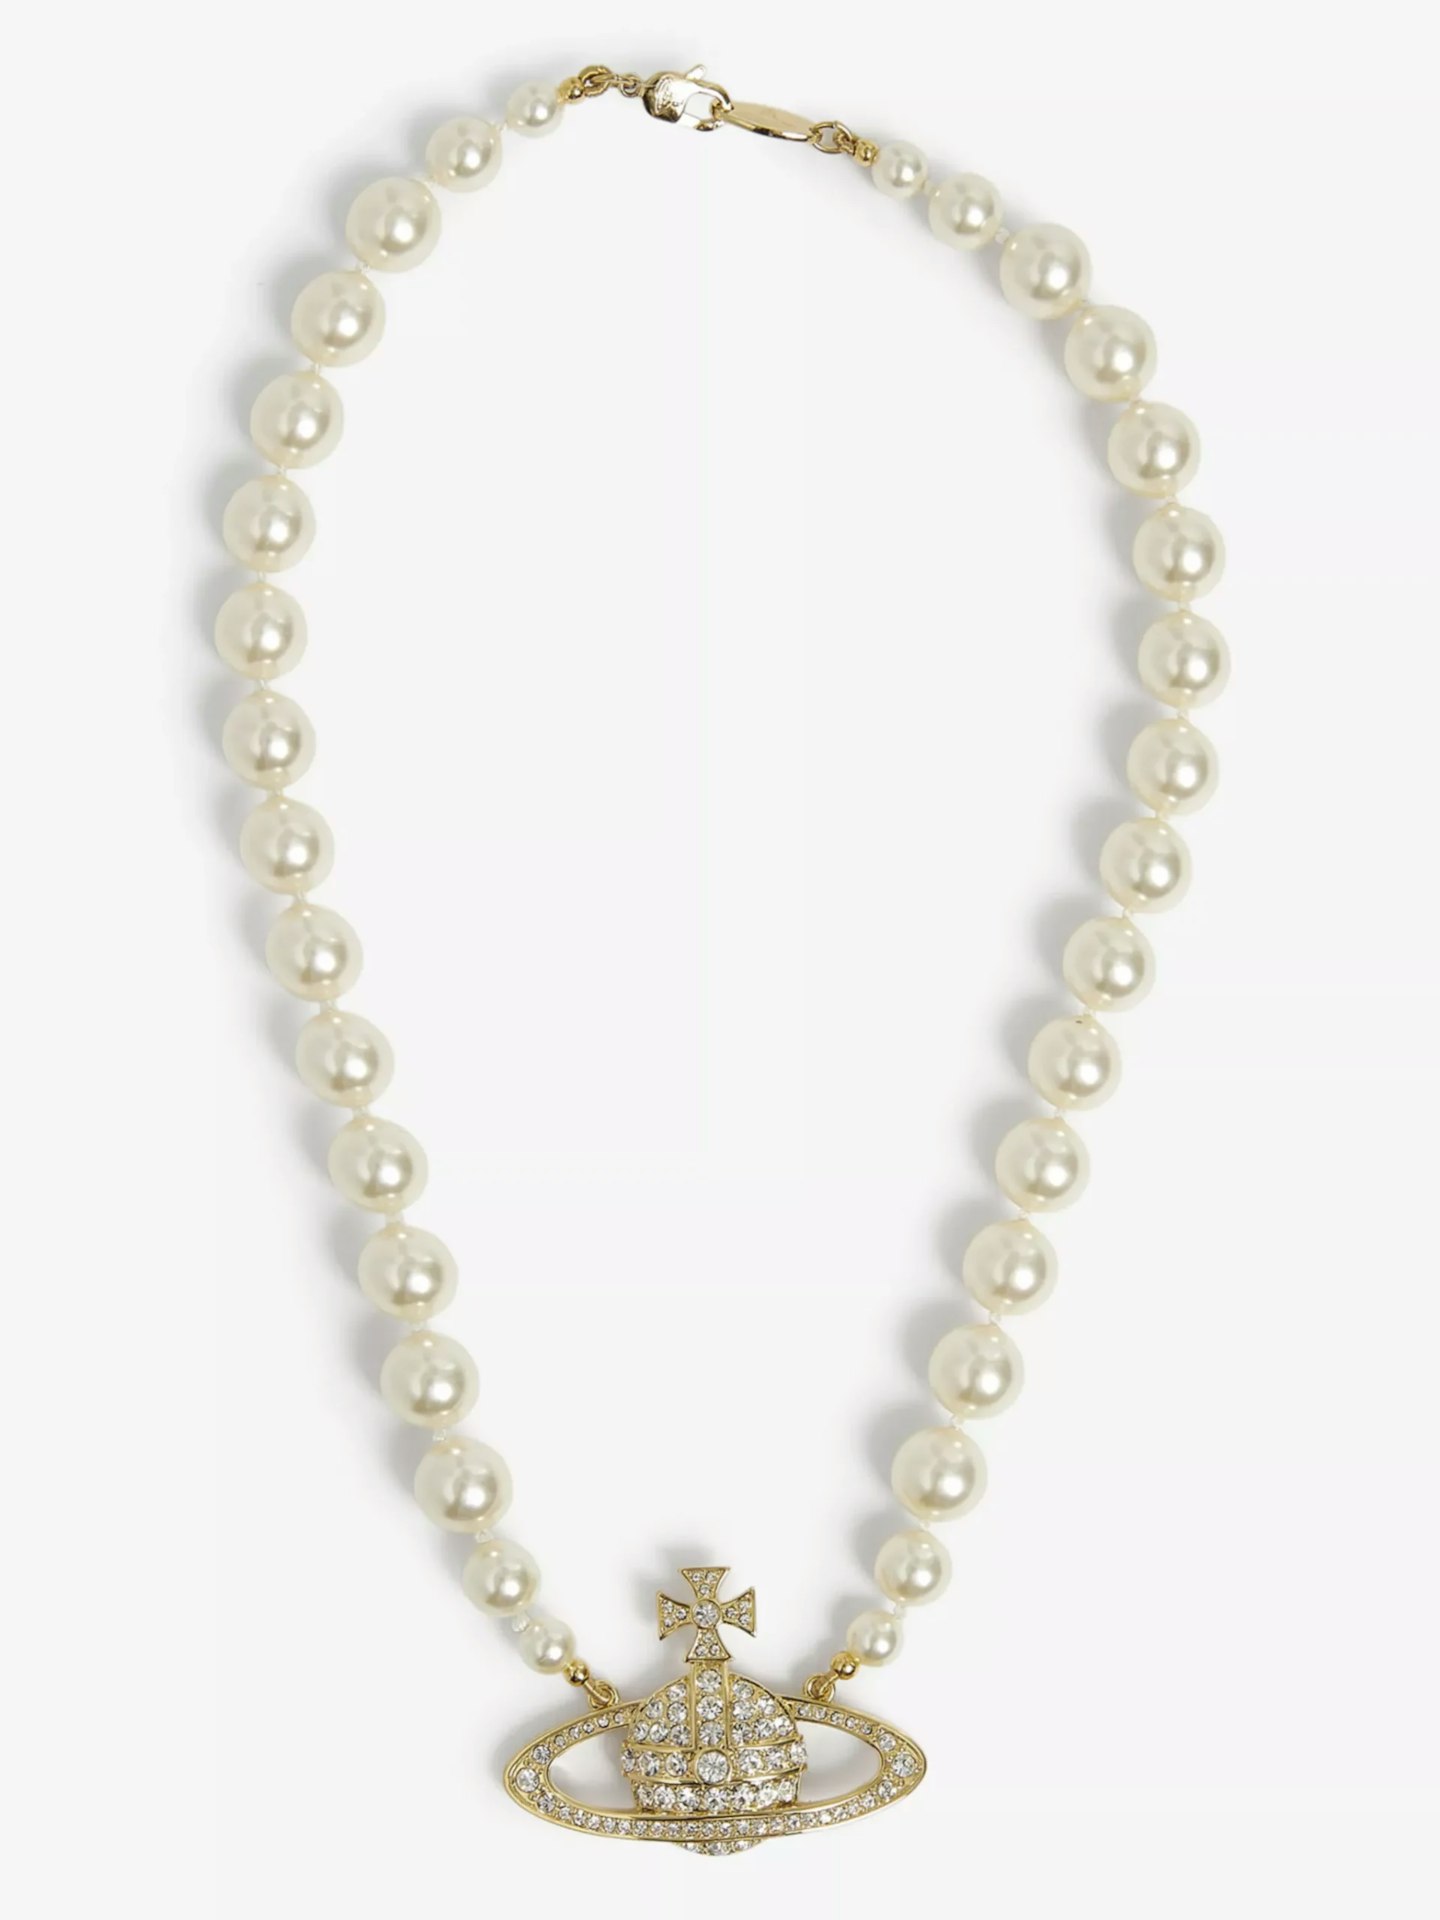 Vivienne Westwood, Bas Relief Yellow-Gold Tone Brass, Pearl and Swarovski Crystal Necklace